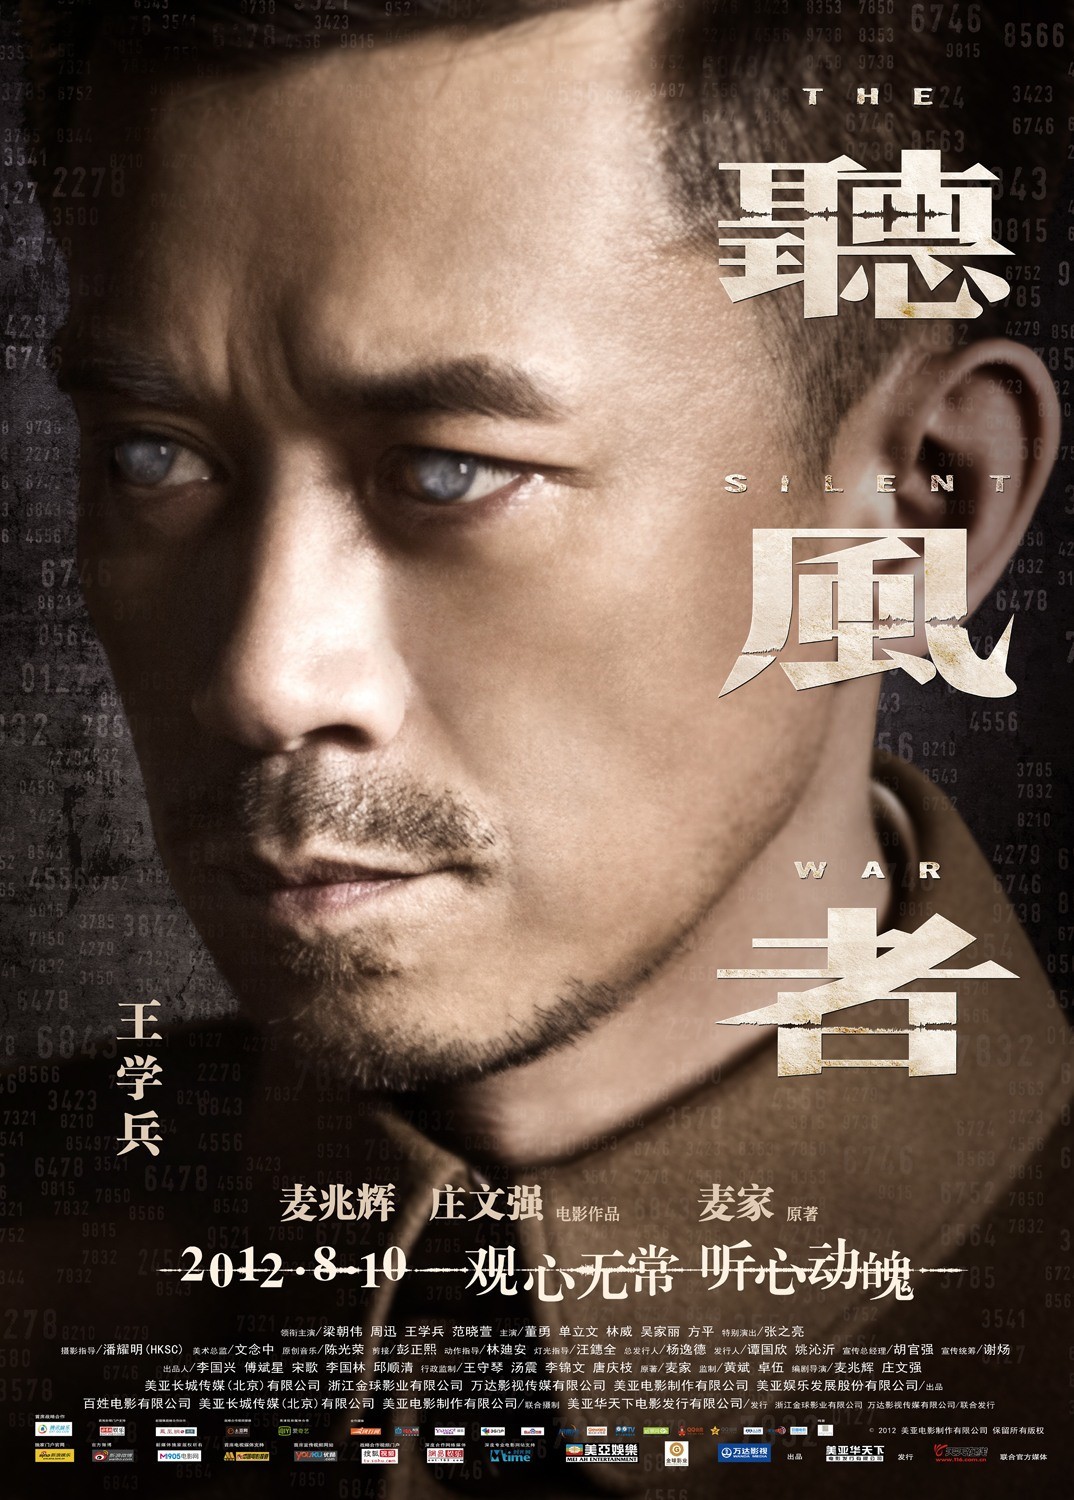 Extra Large Movie Poster Image for Ting feng zhe (#5 of 9)